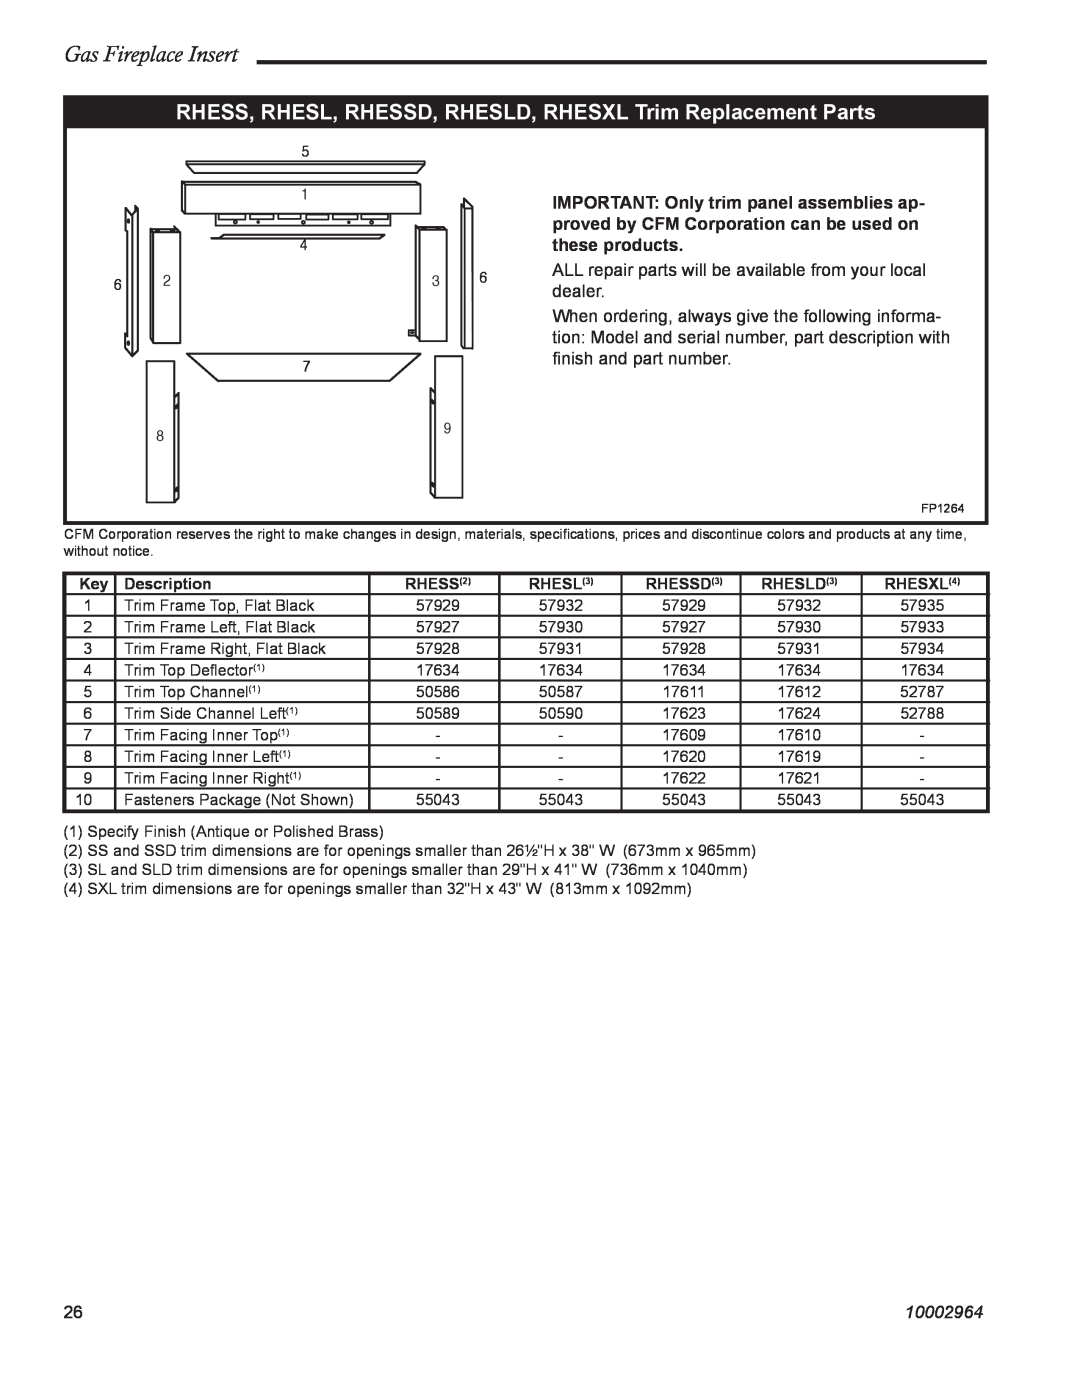 CFM Corporation A125, A132 Gas Fireplace Insert, IMPORTANT Only trim panel assemblies ap, these products, dealer, 10002964 